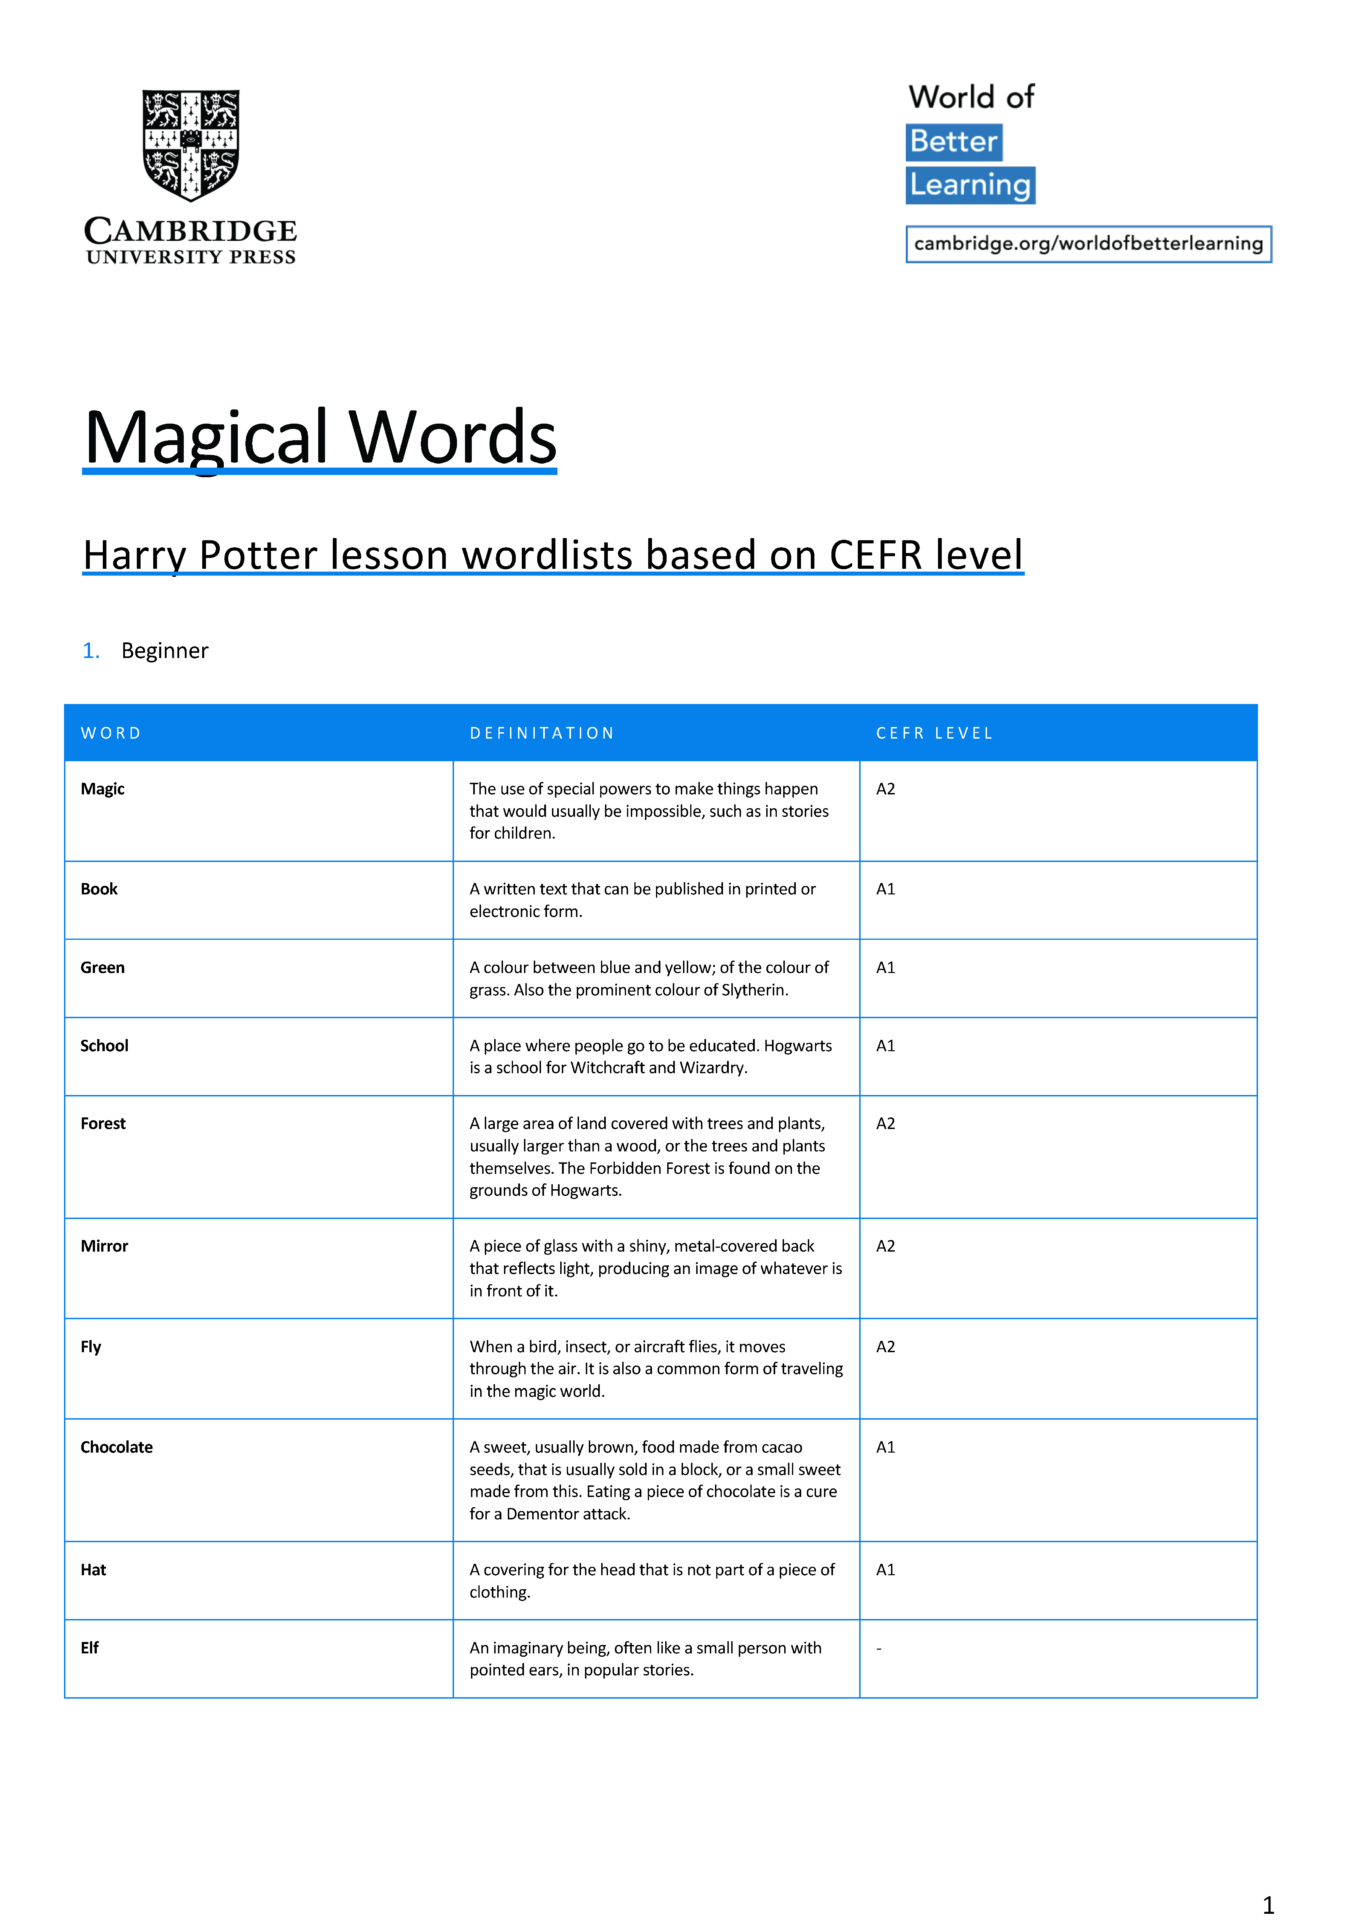 The Power of Words: The Language and Writing Style of the Harry Potter Books 2